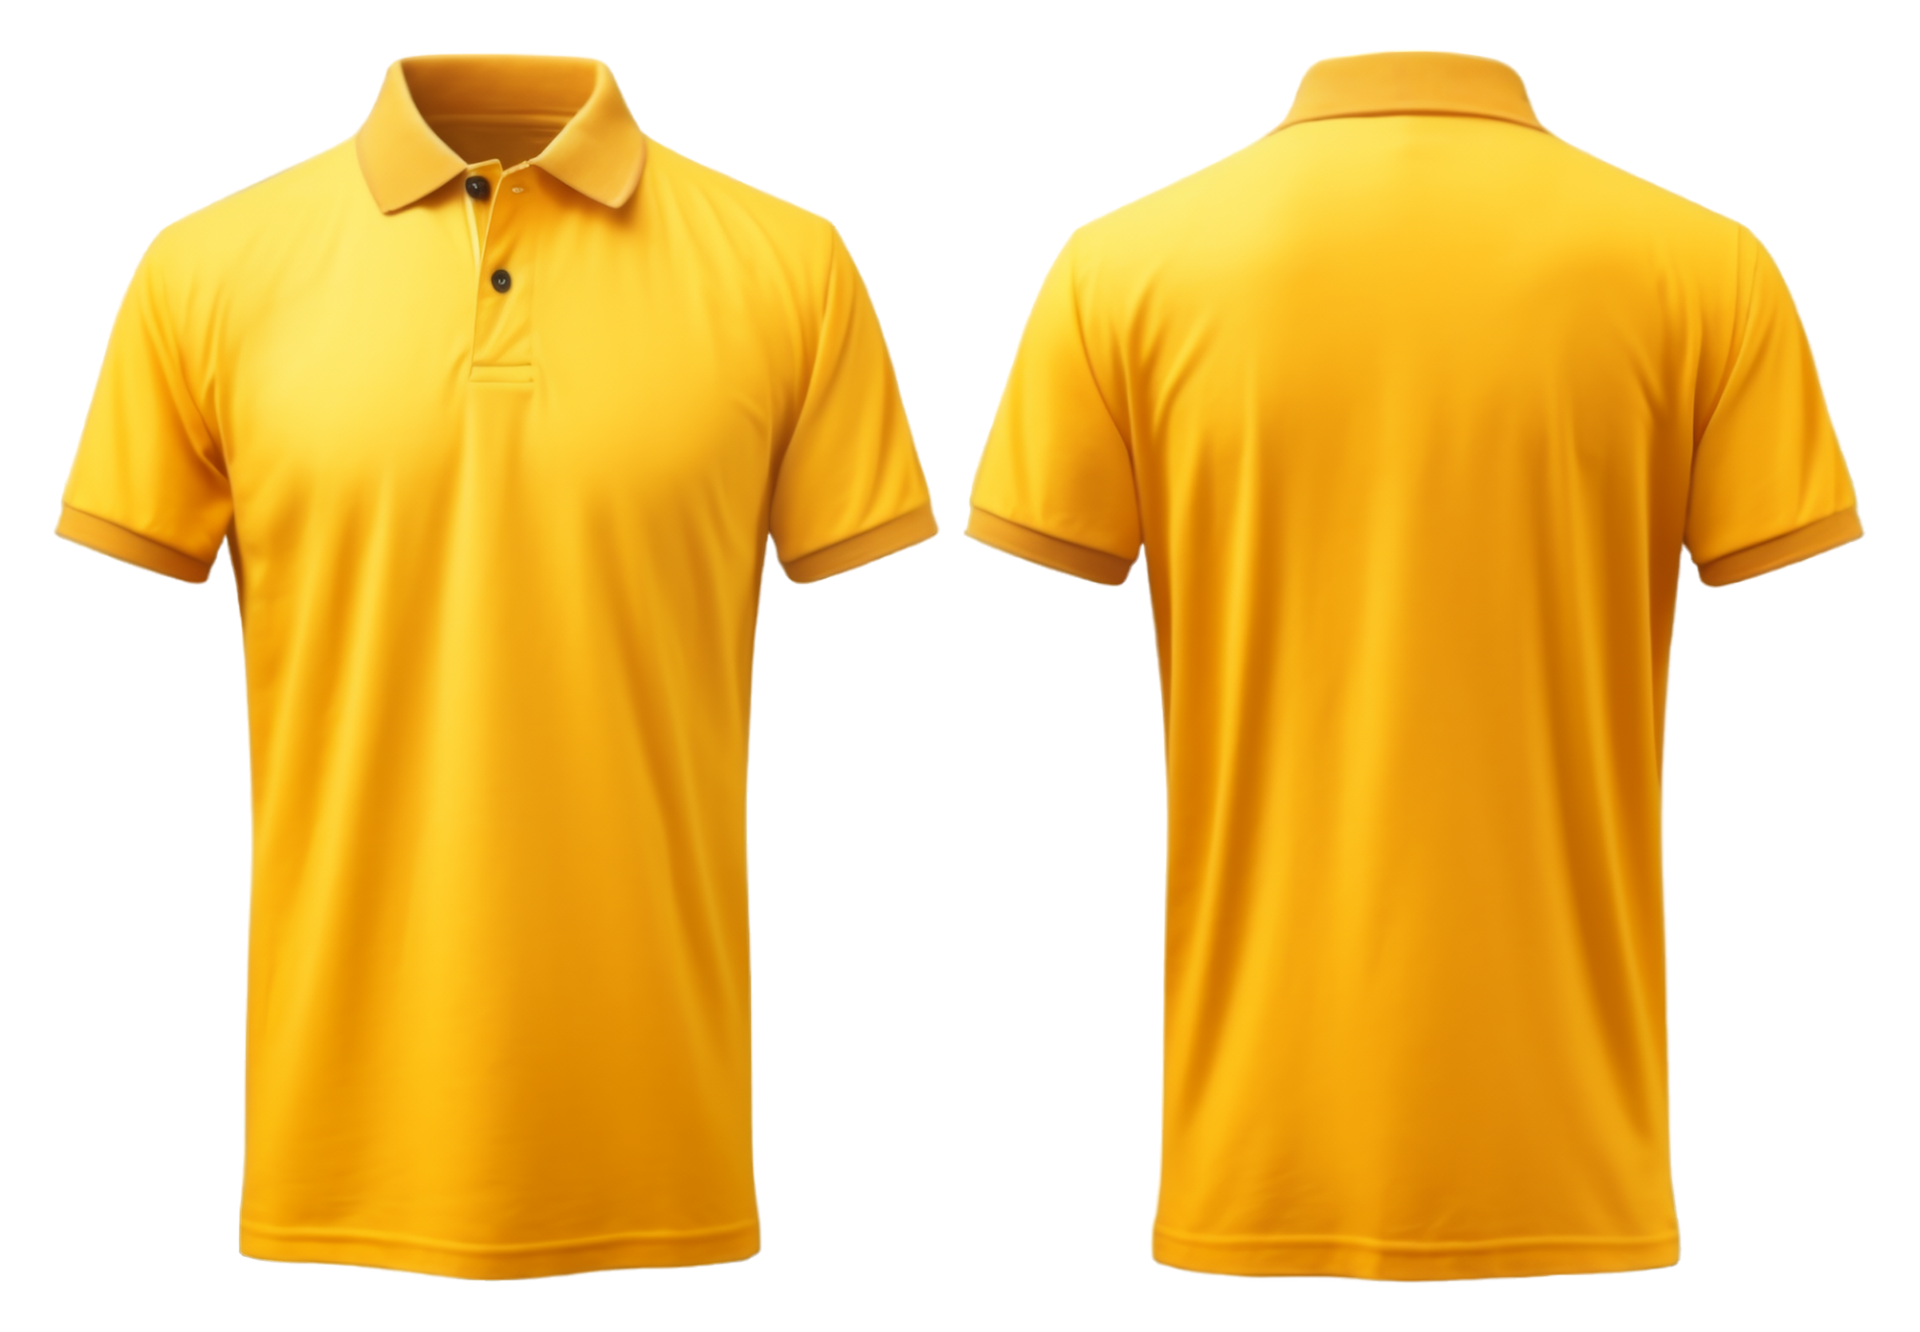 plain yellow polo shirt mockup design. front and back views. isolated ...